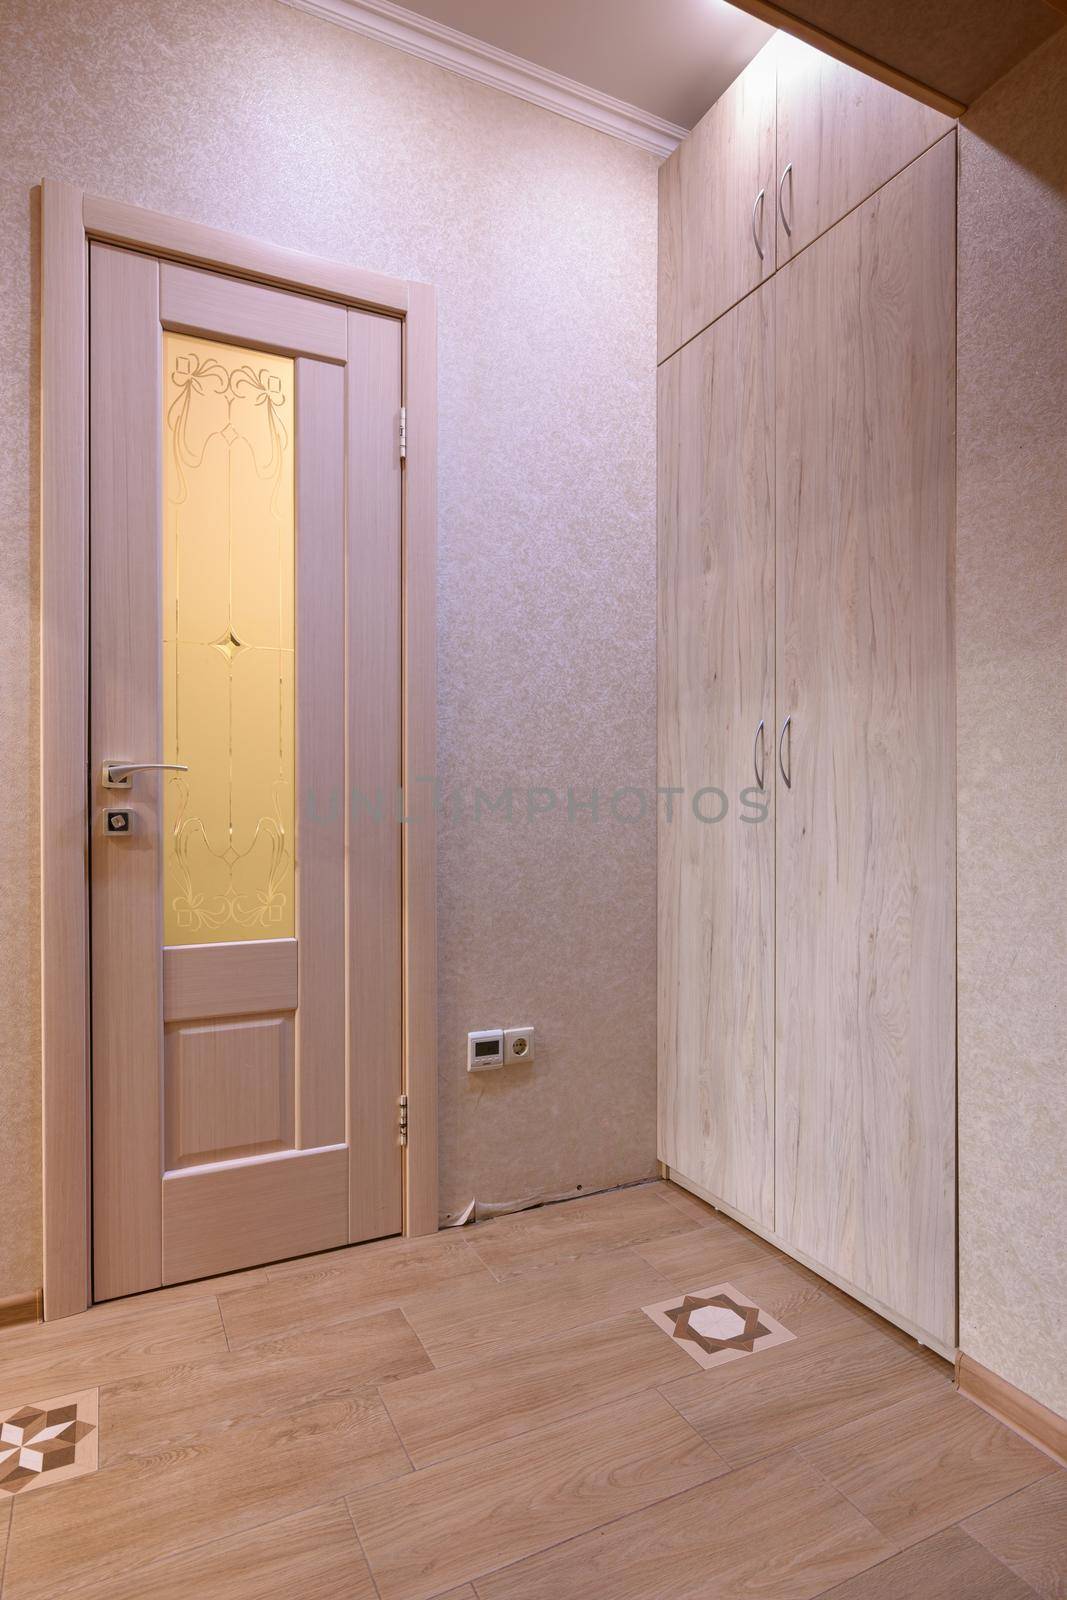 View of the door to the toilet room and a large wardrobe in the interior of the hallway by Madhourse